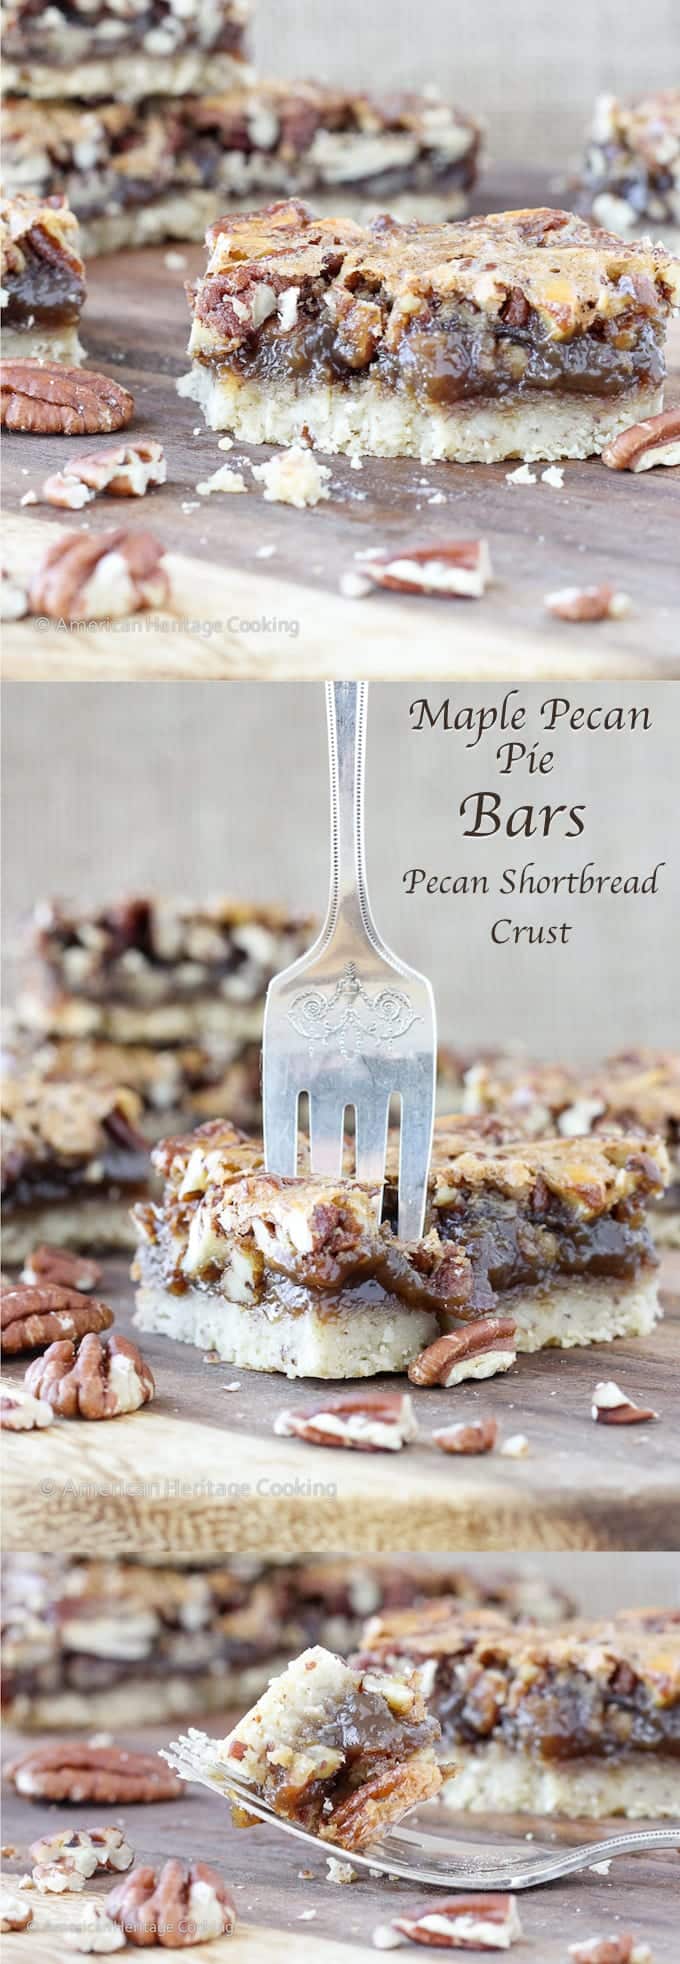 Maple Pecan Pie Bars with Pecan Shortbread Crust | Easier than pie! But just as delicious!